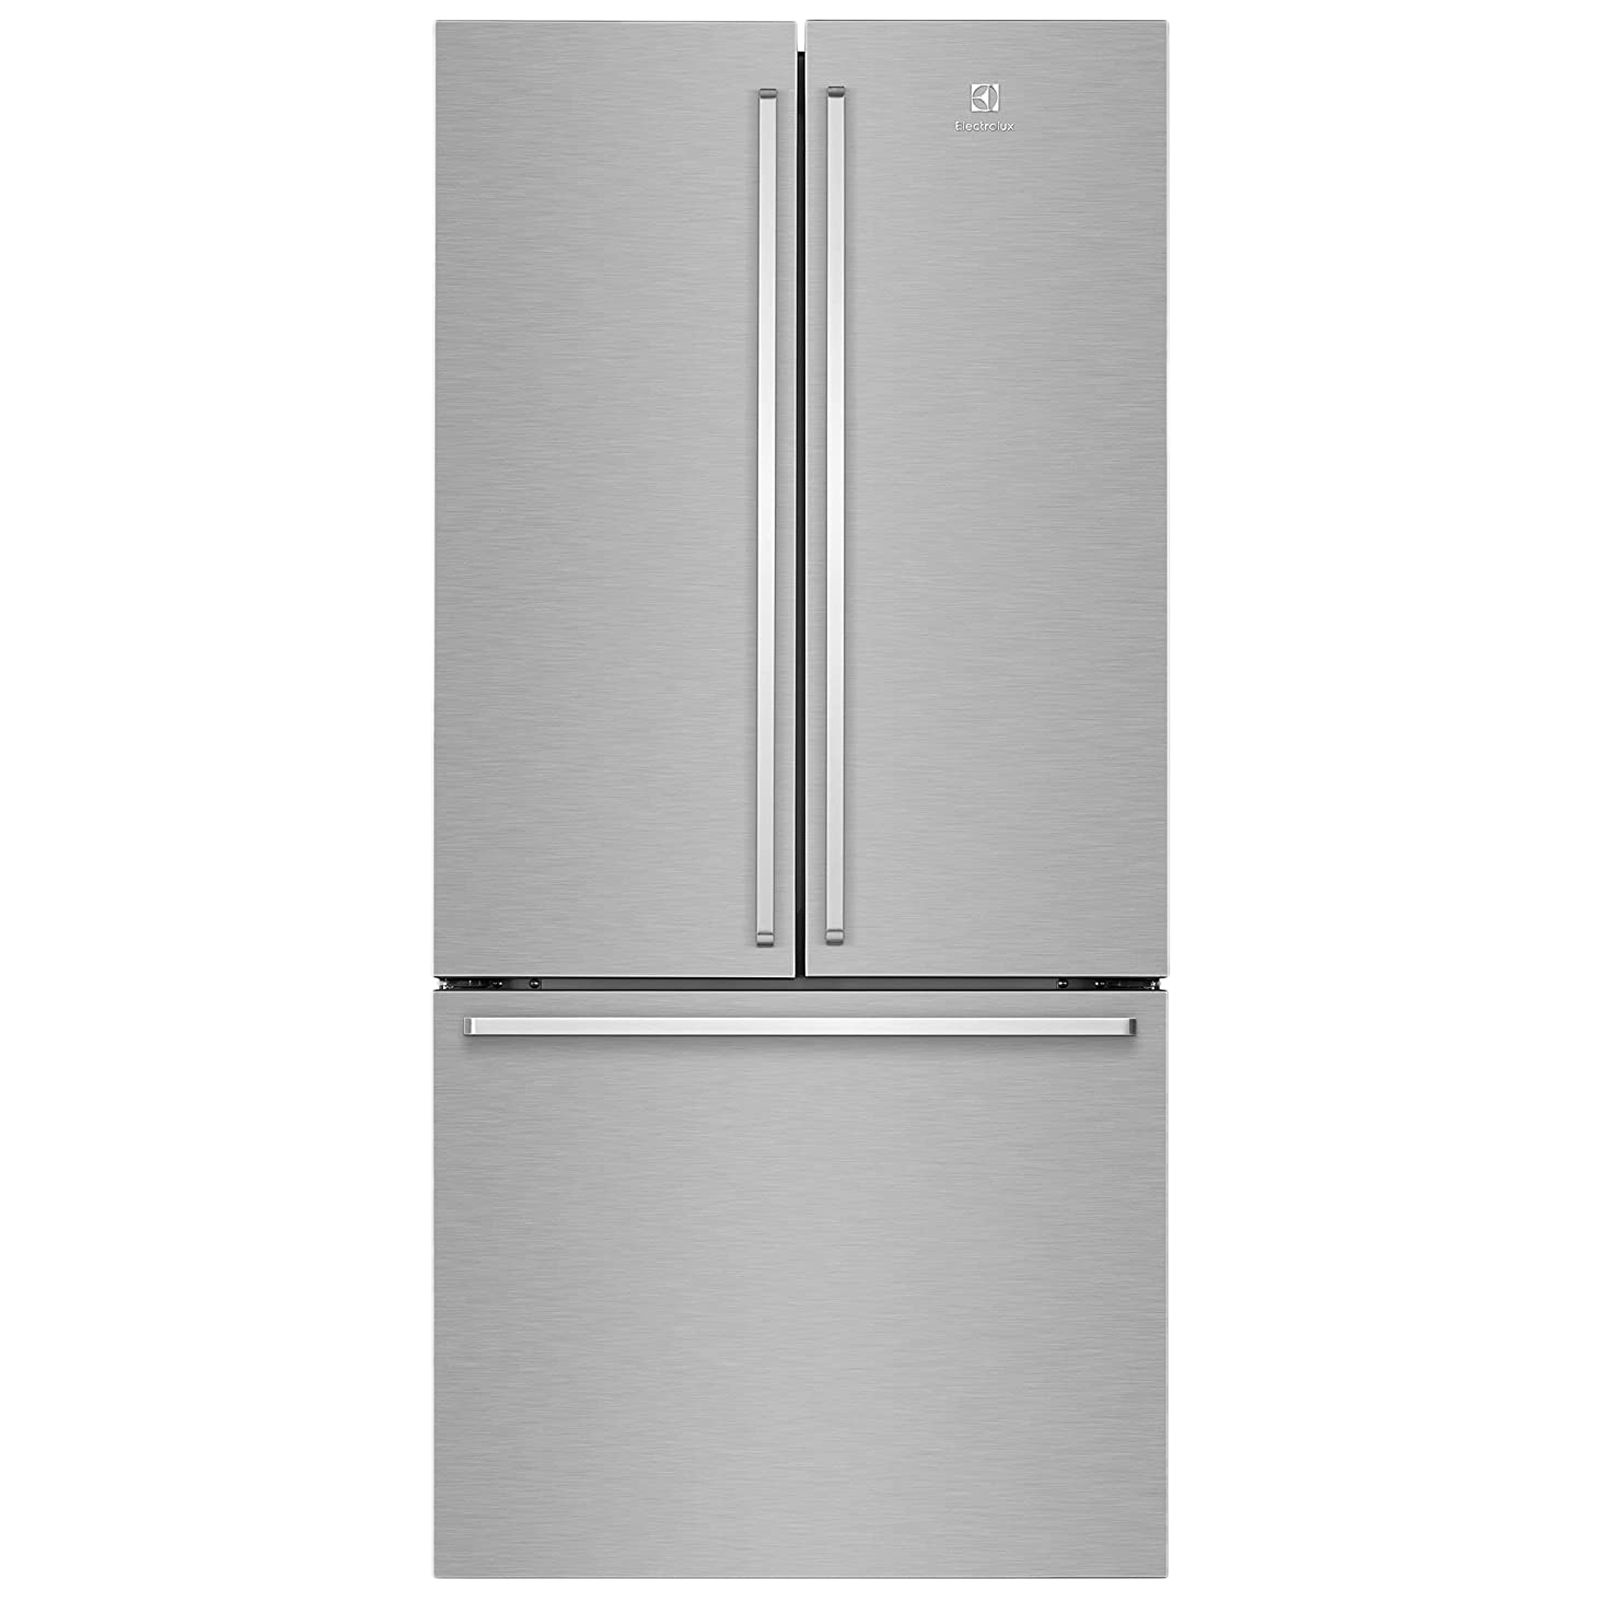 Electrolux UltimateTaste 700 524 Litres Frost Free French Door Refrigerator with NutriFresher Inverter Compressor (EHE5224C-A NIN, Arctic Silver)